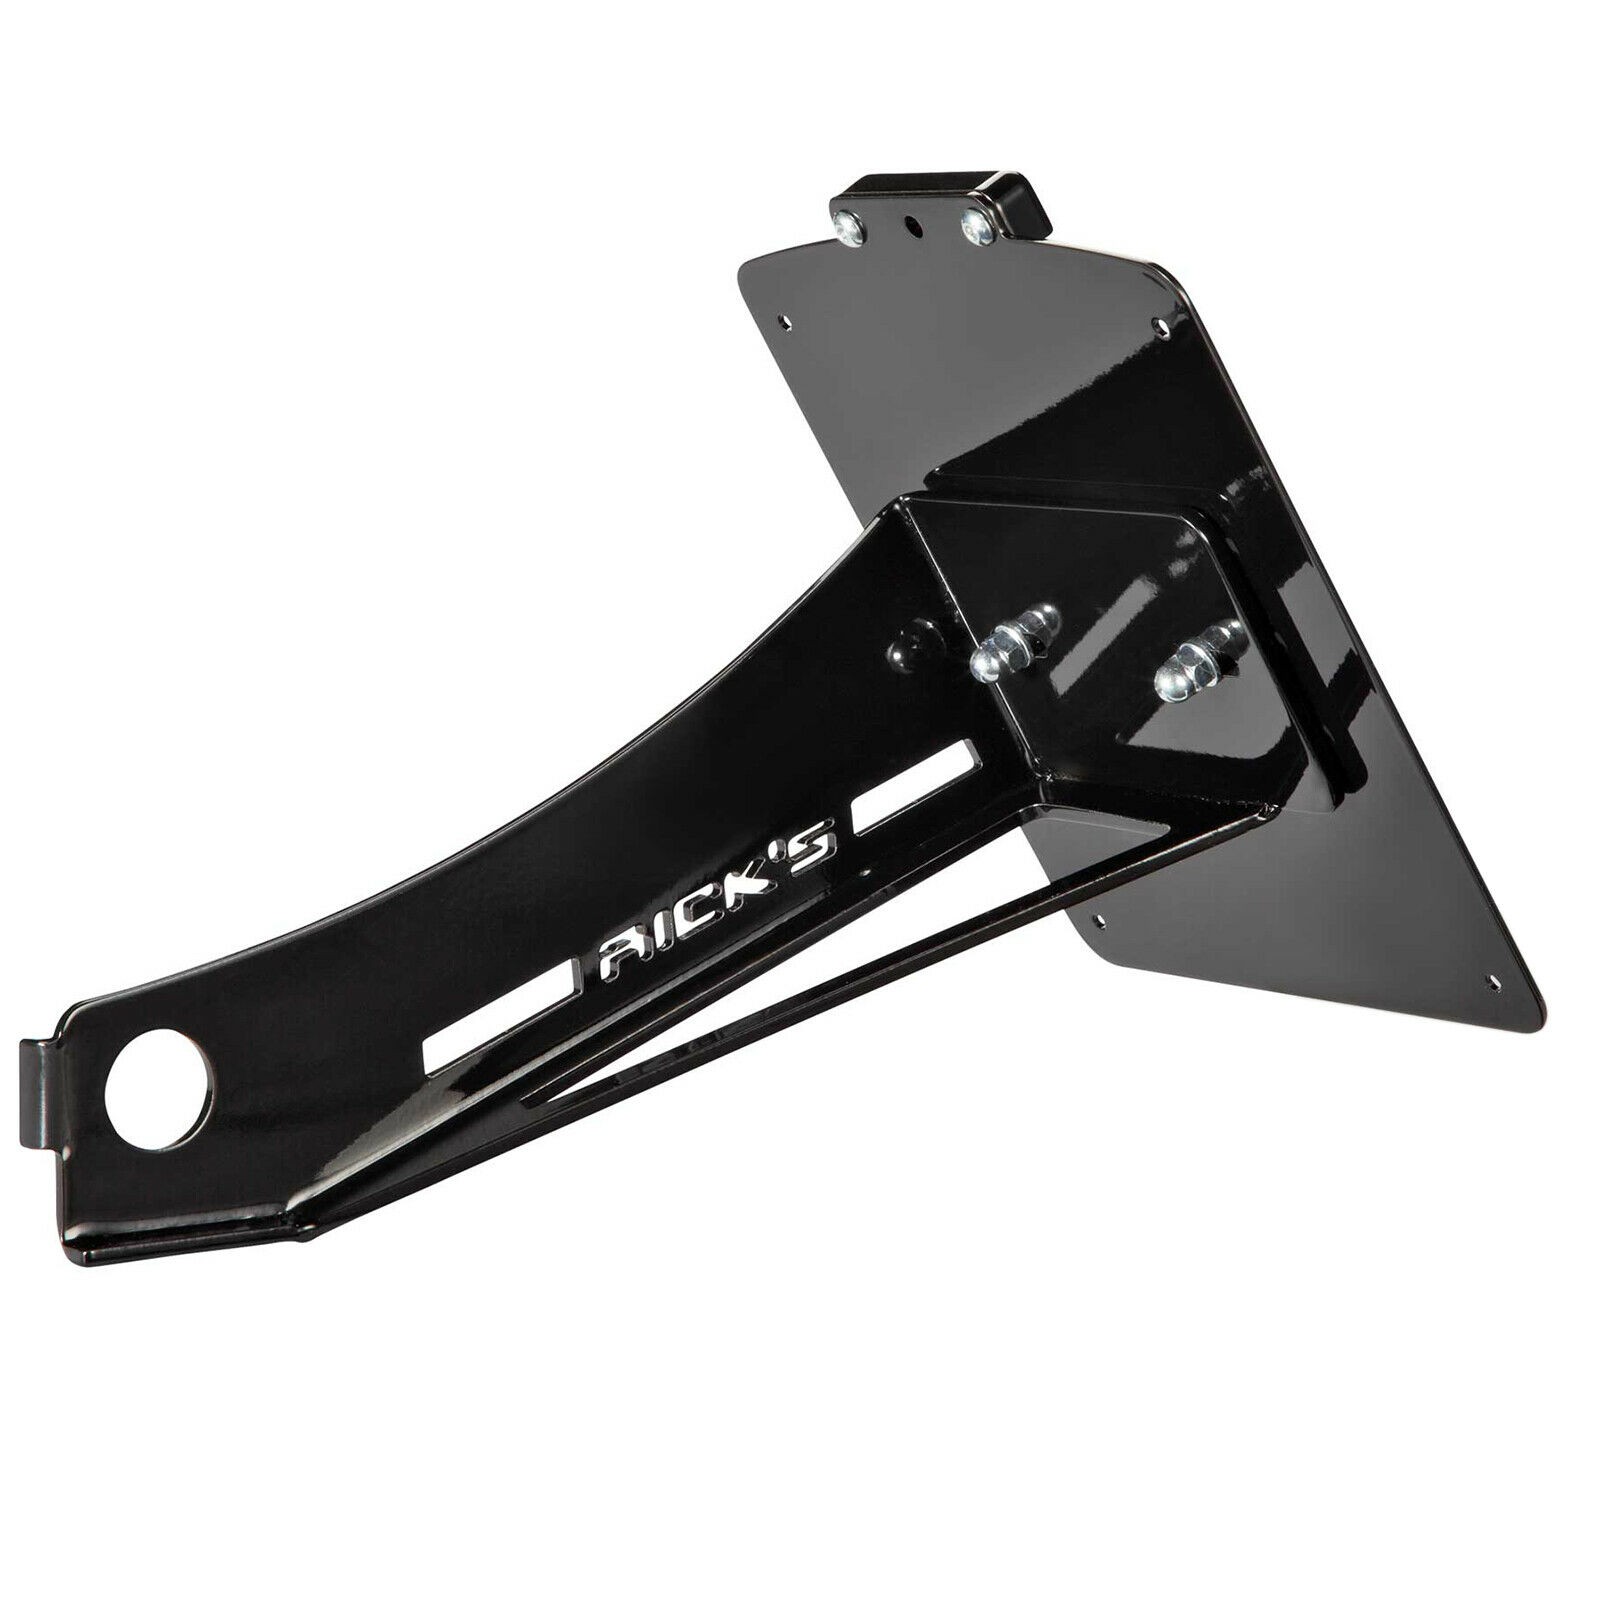 Rick's Motorcycles license plate holder kit with plate black